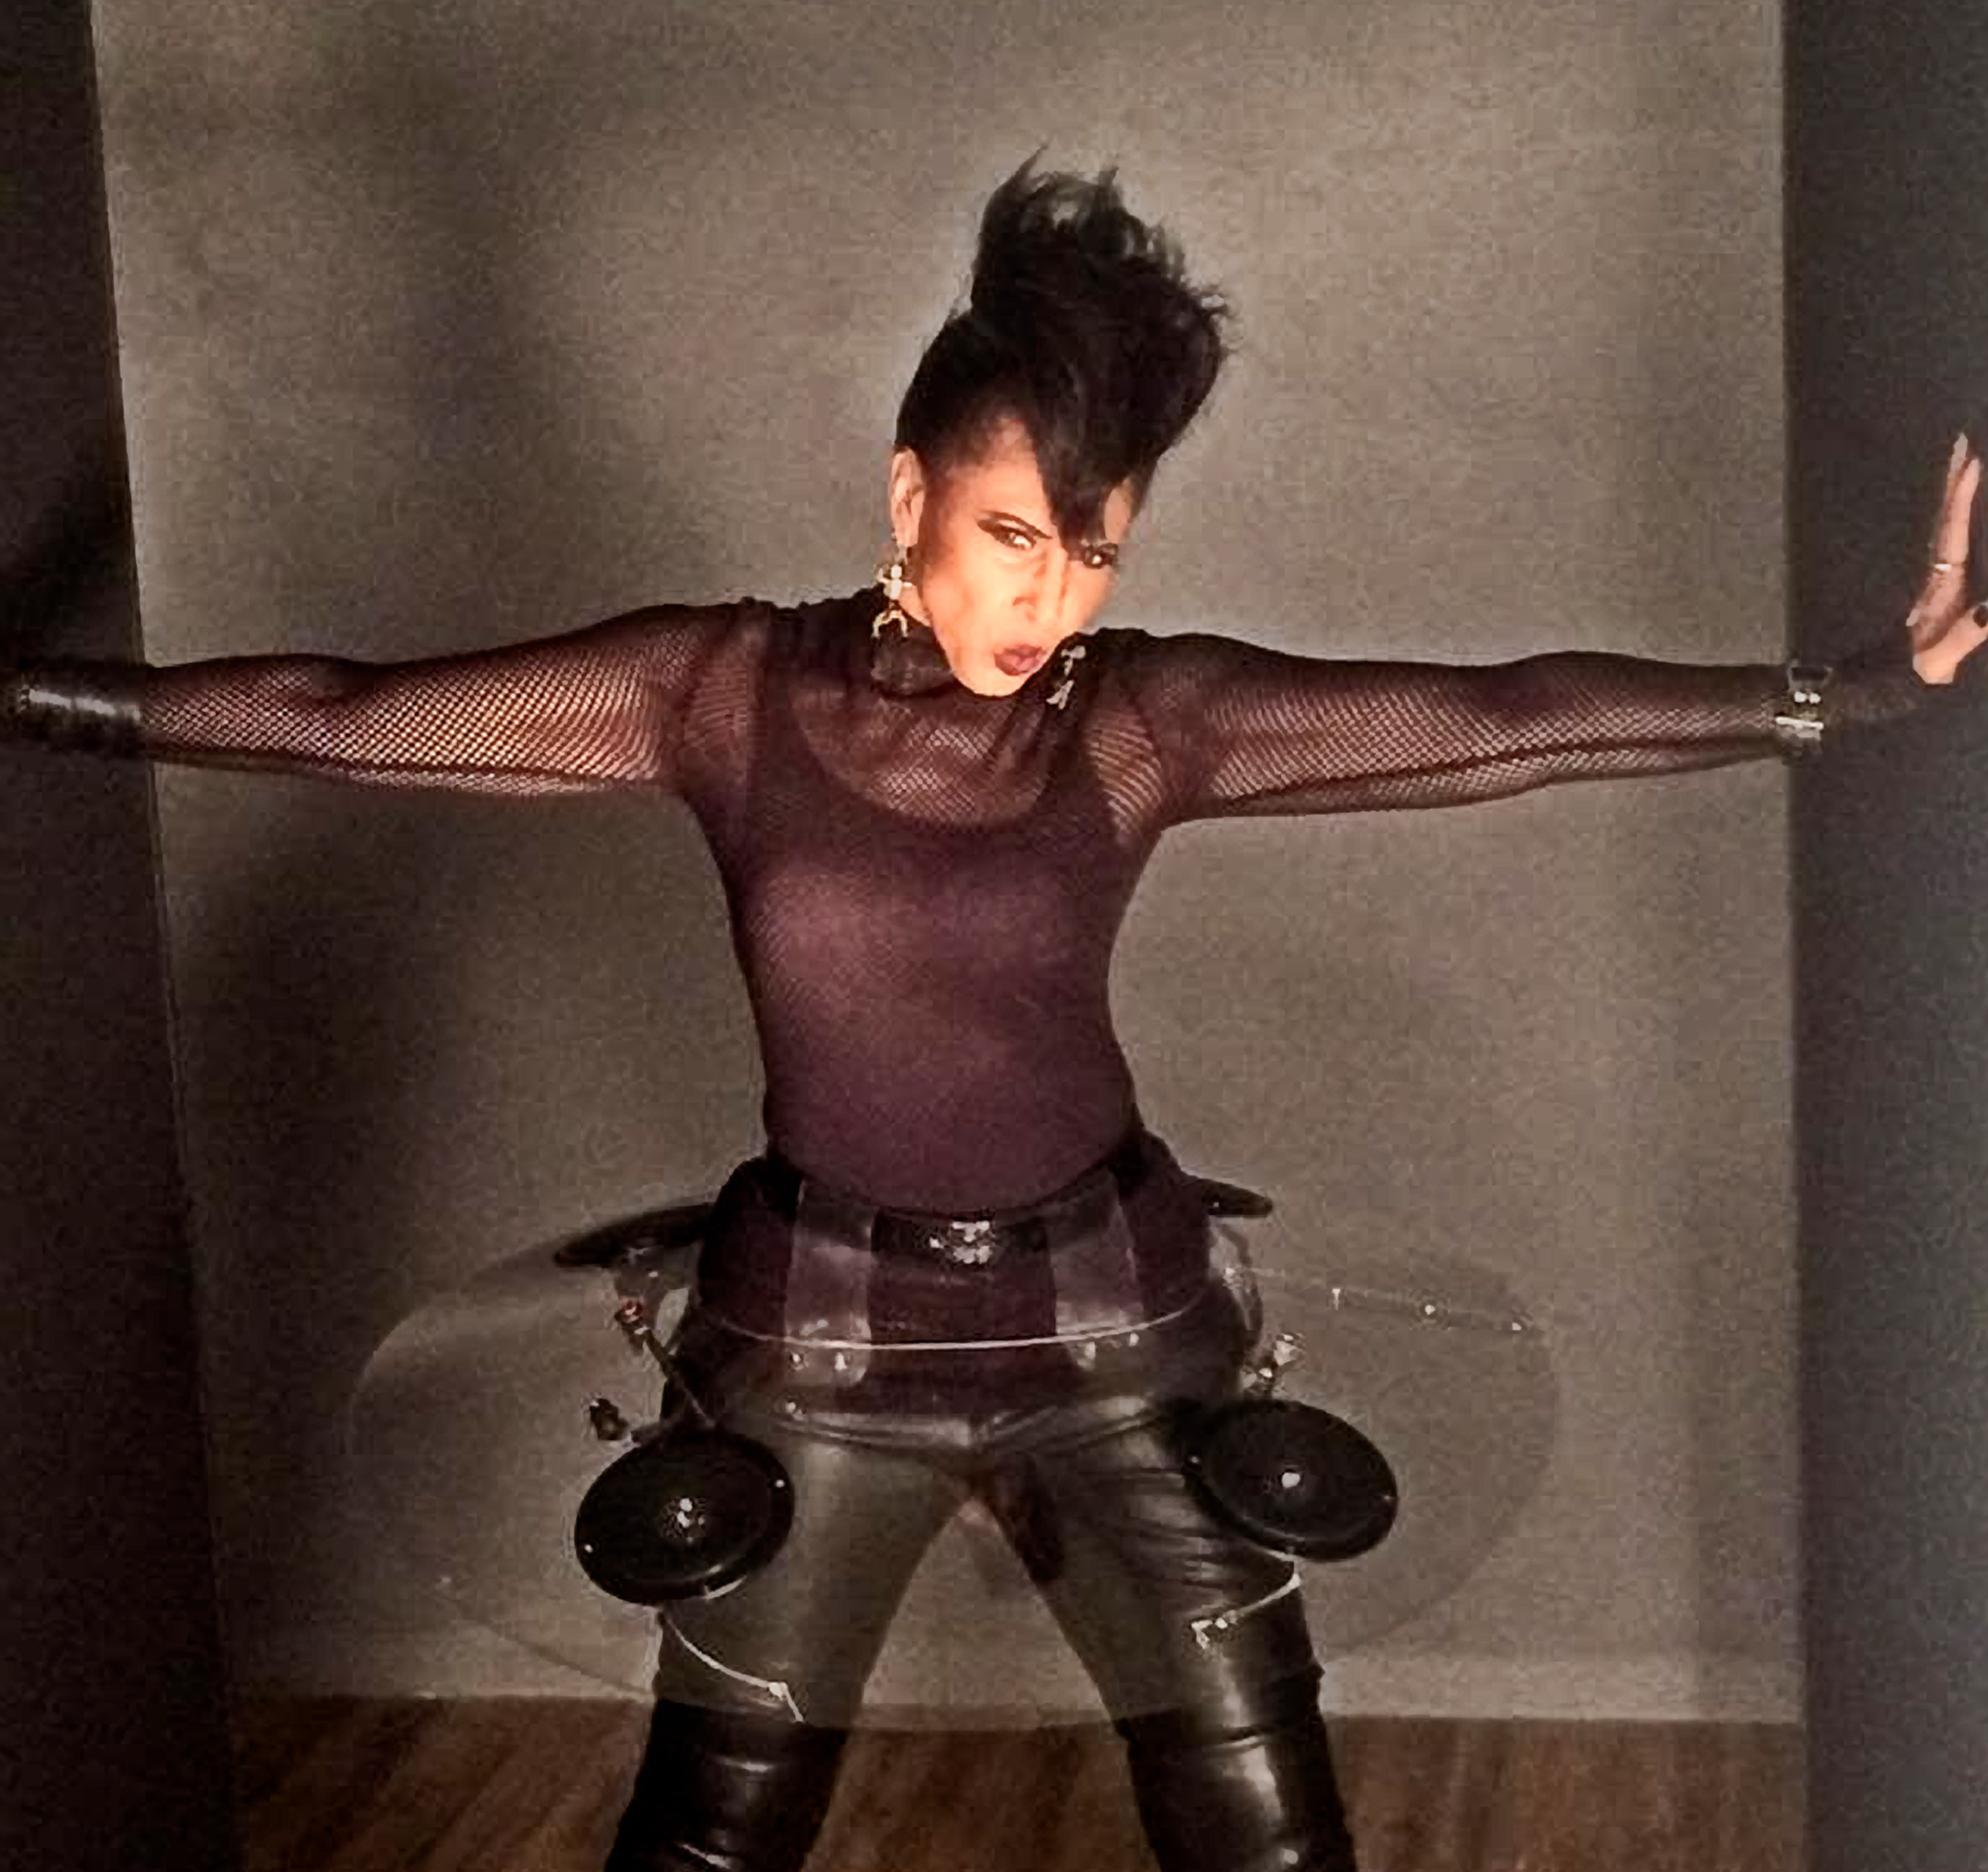 Nona Hendryx striking a pose with her arms stretched out to the side